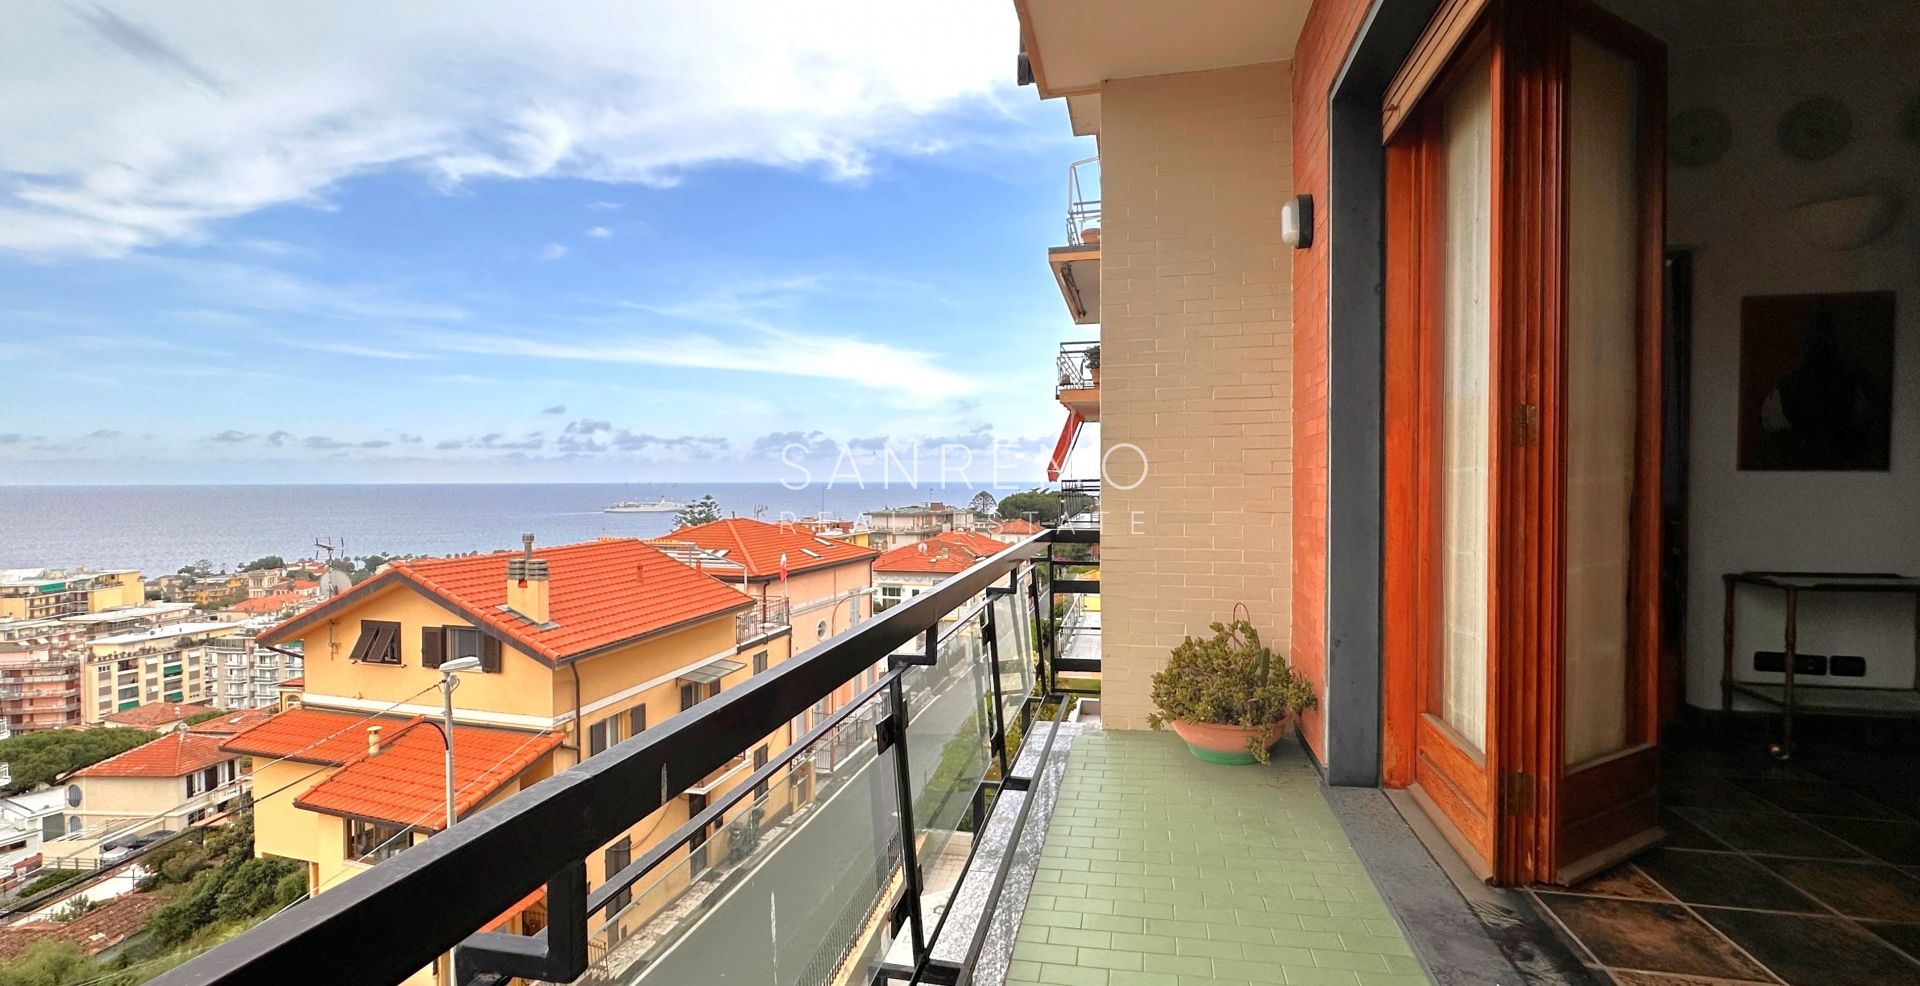 Large accommodation behind Portosole with a pleasant sea view